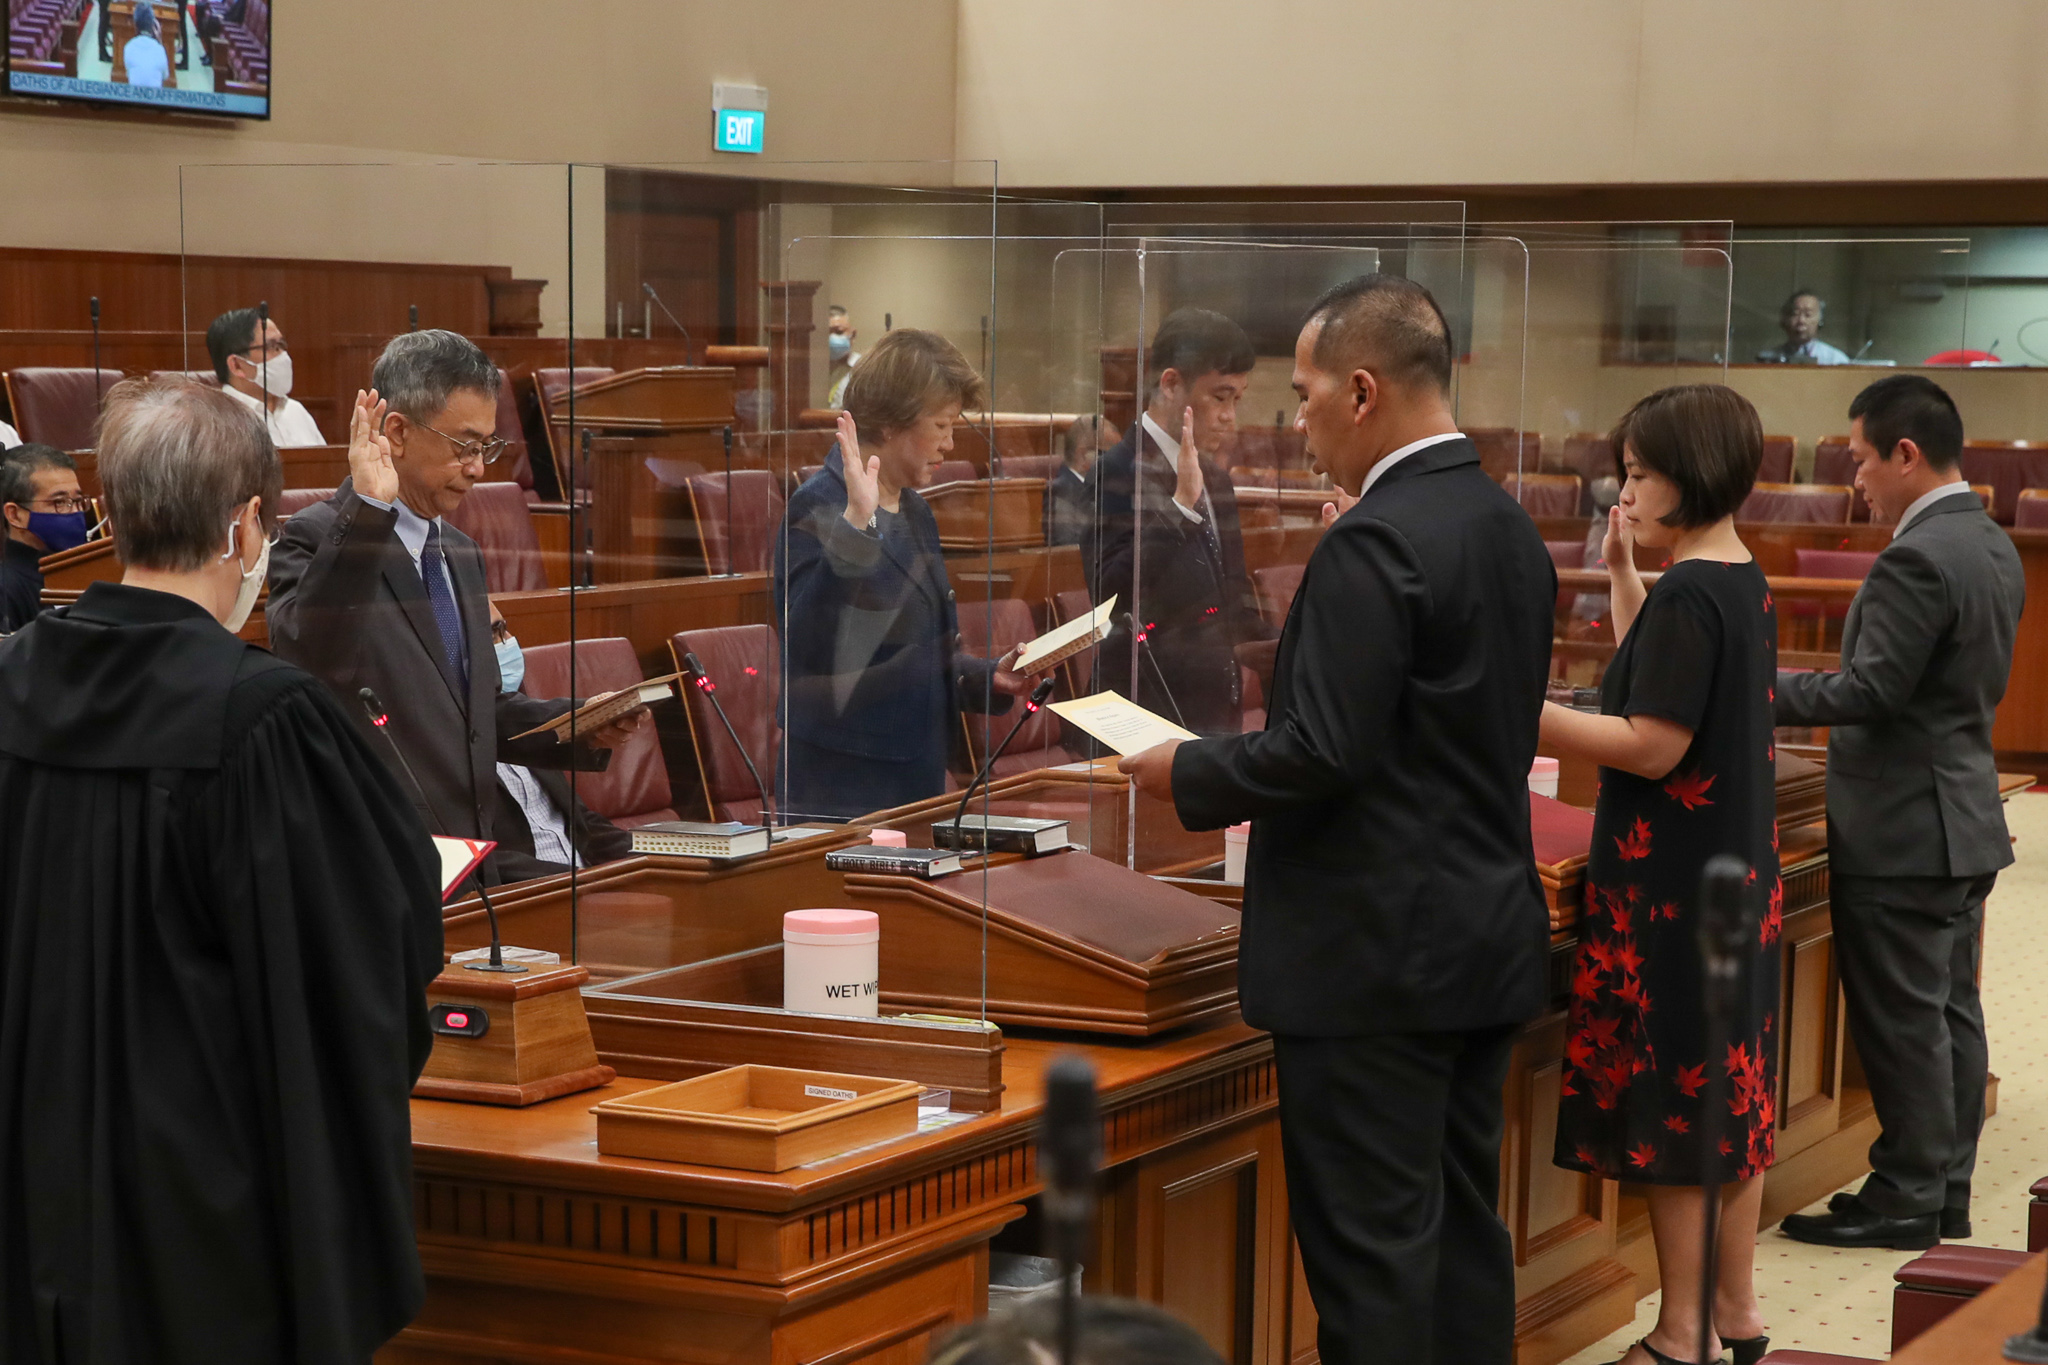 NMP Oath-Taking in Chamber